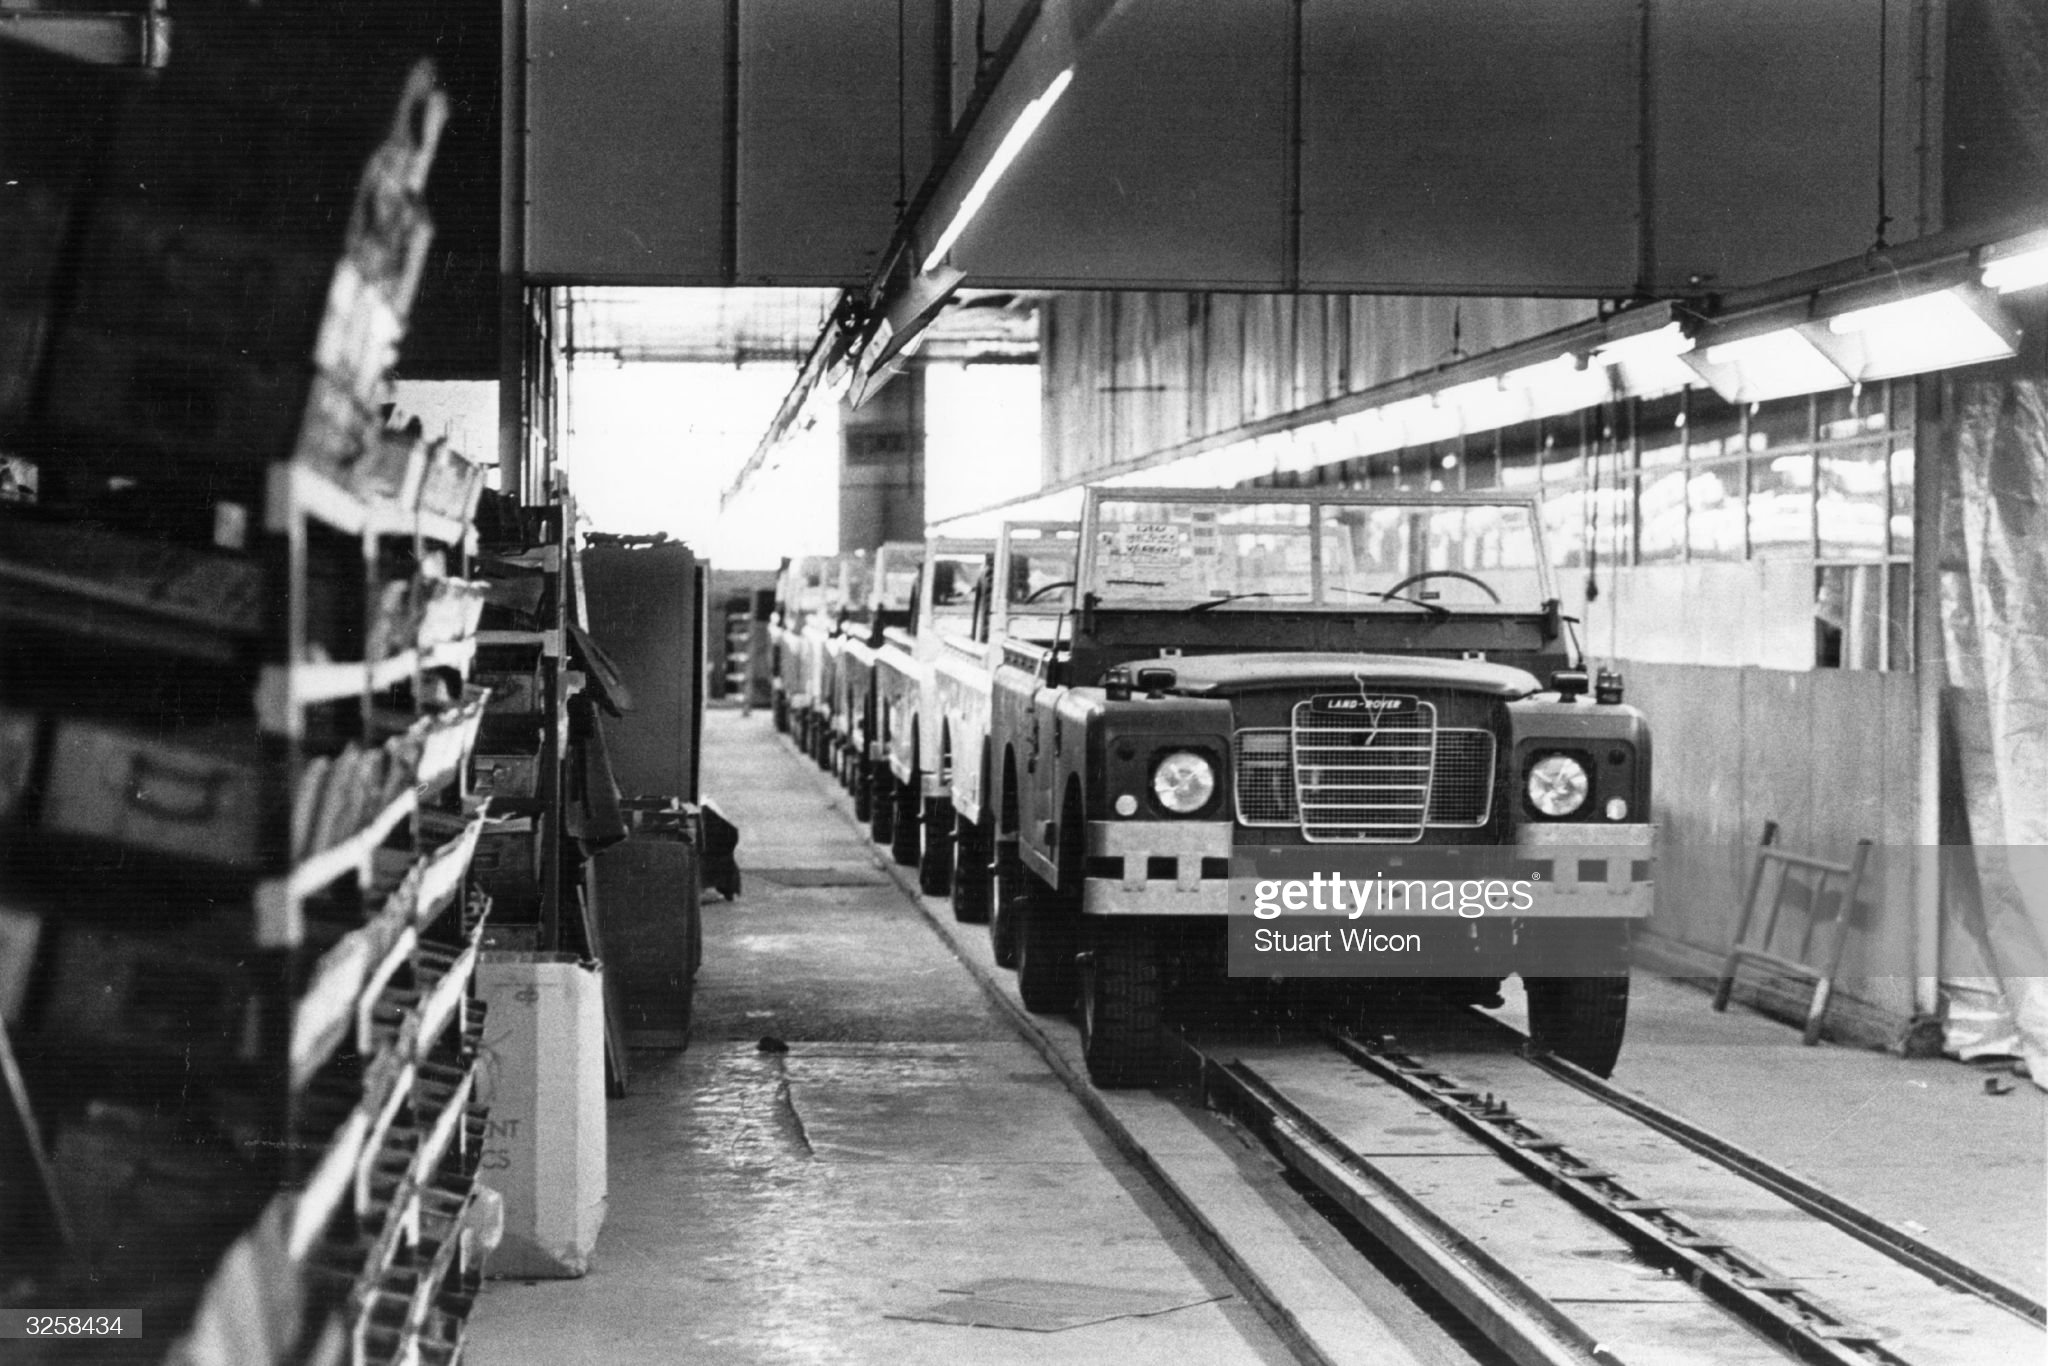 14th August 1980: the Land Rover production line, at Solihull in Birmingham.